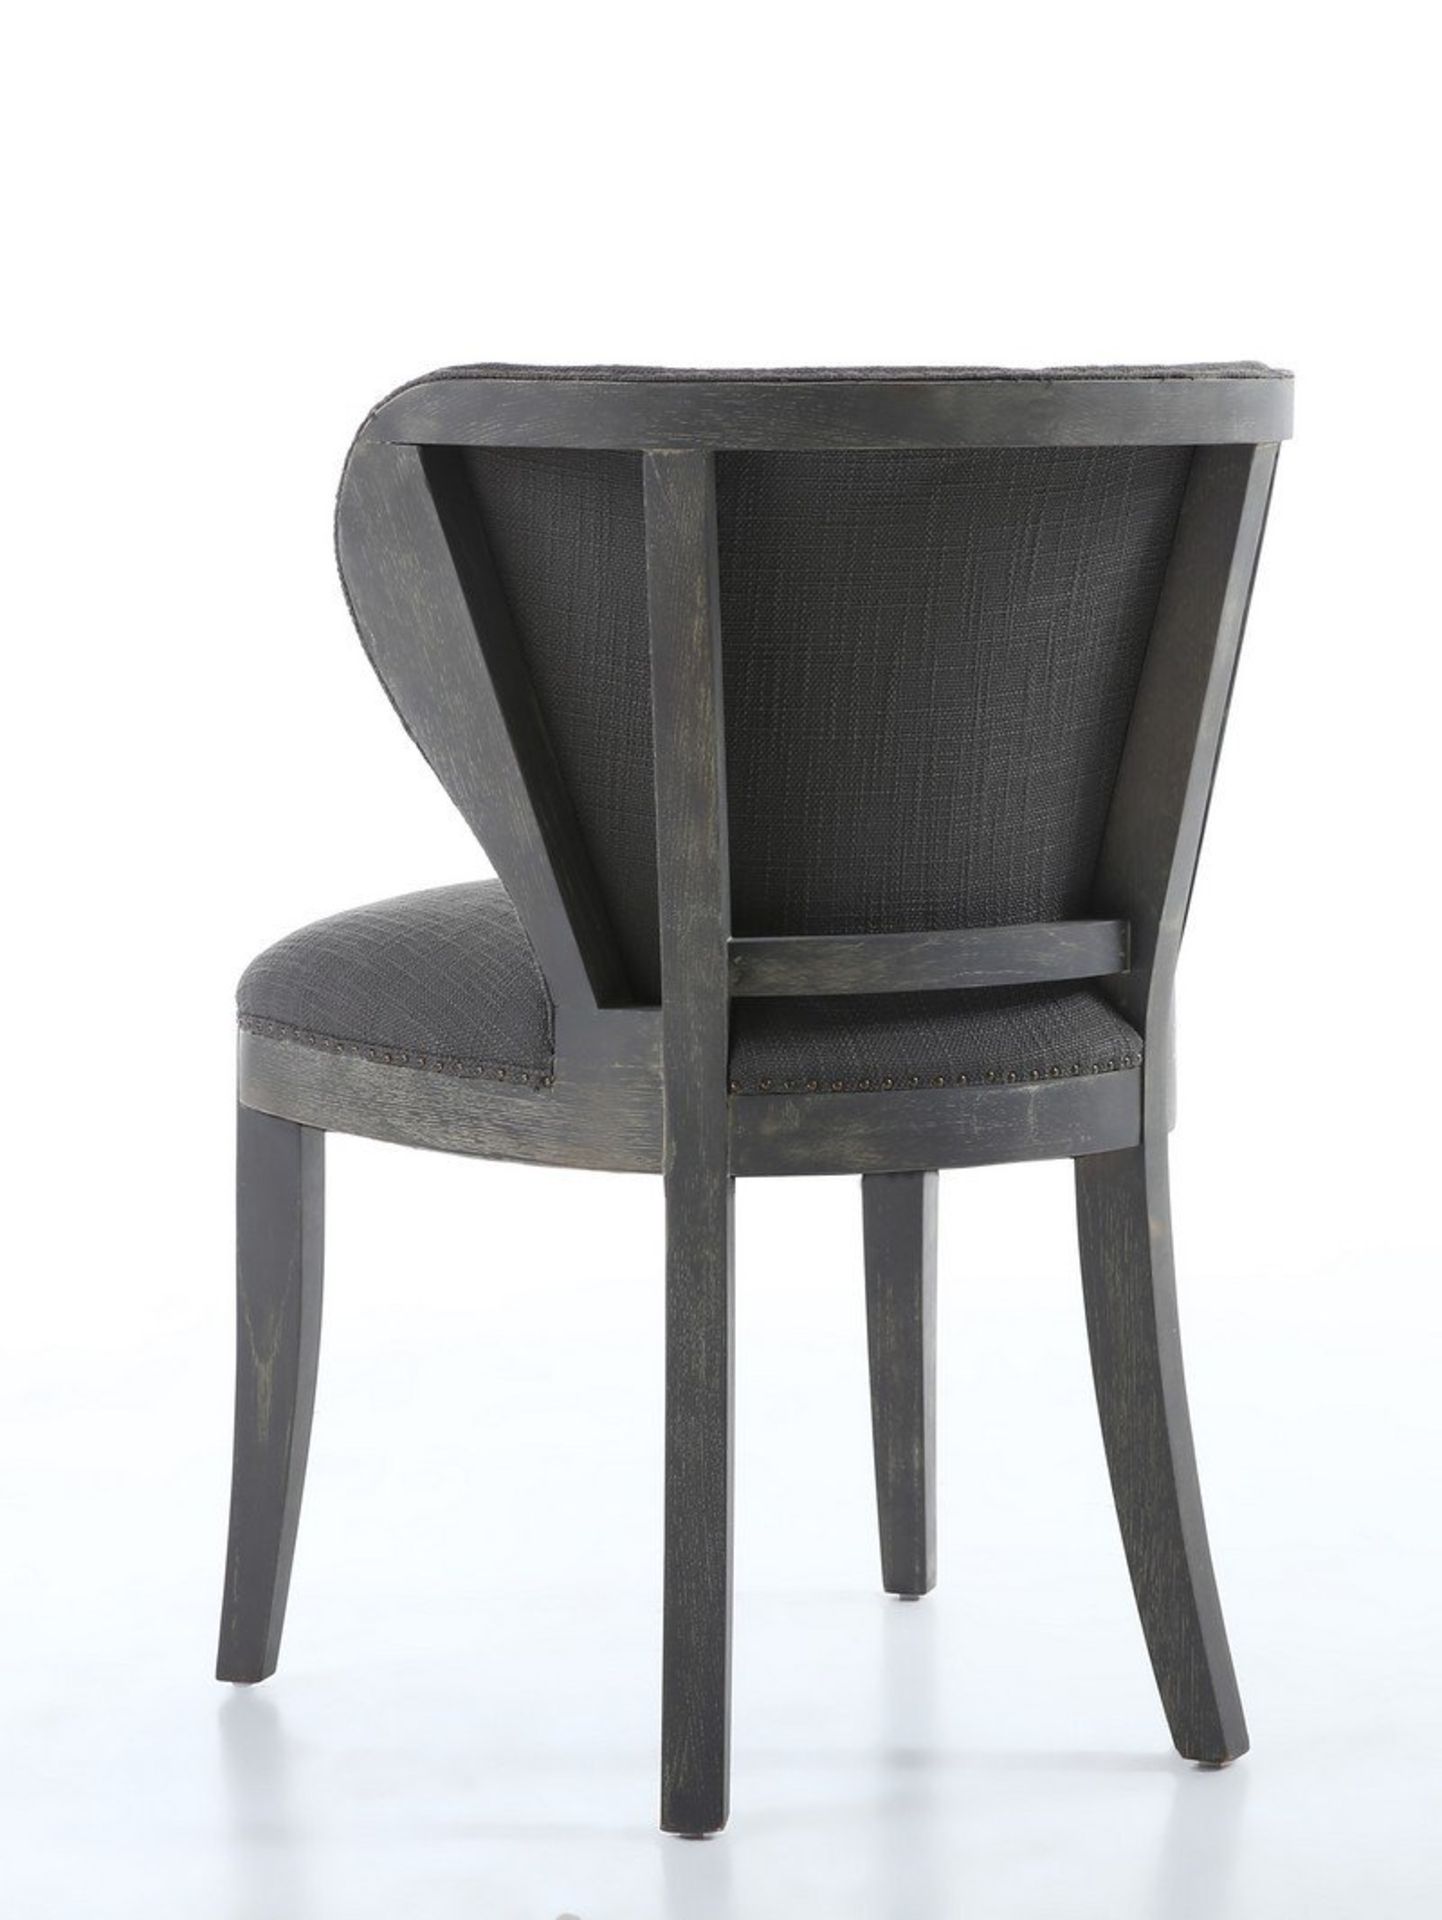 Regal Antique Grey Linen Fabric Wing back Dining chair - Image 4 of 5